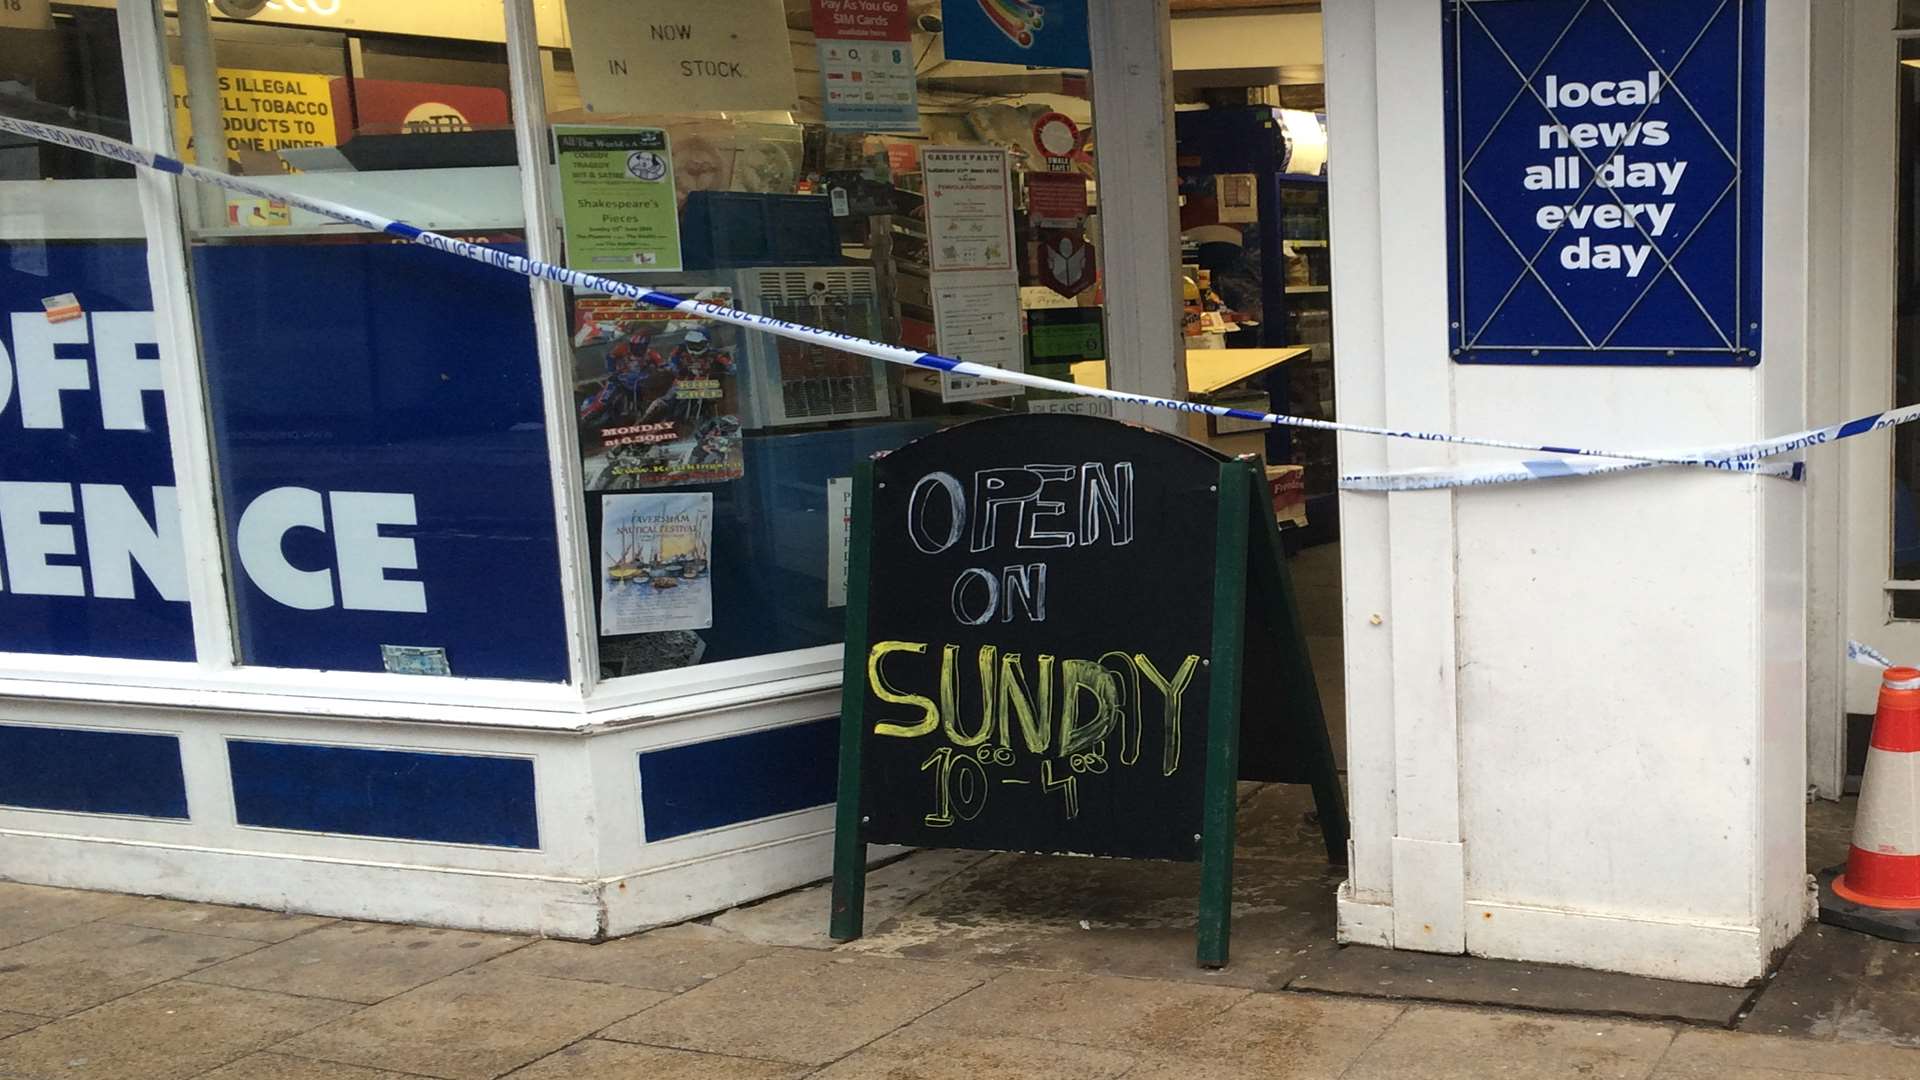 The newsagents has been cordoned off this morning after a break-in.